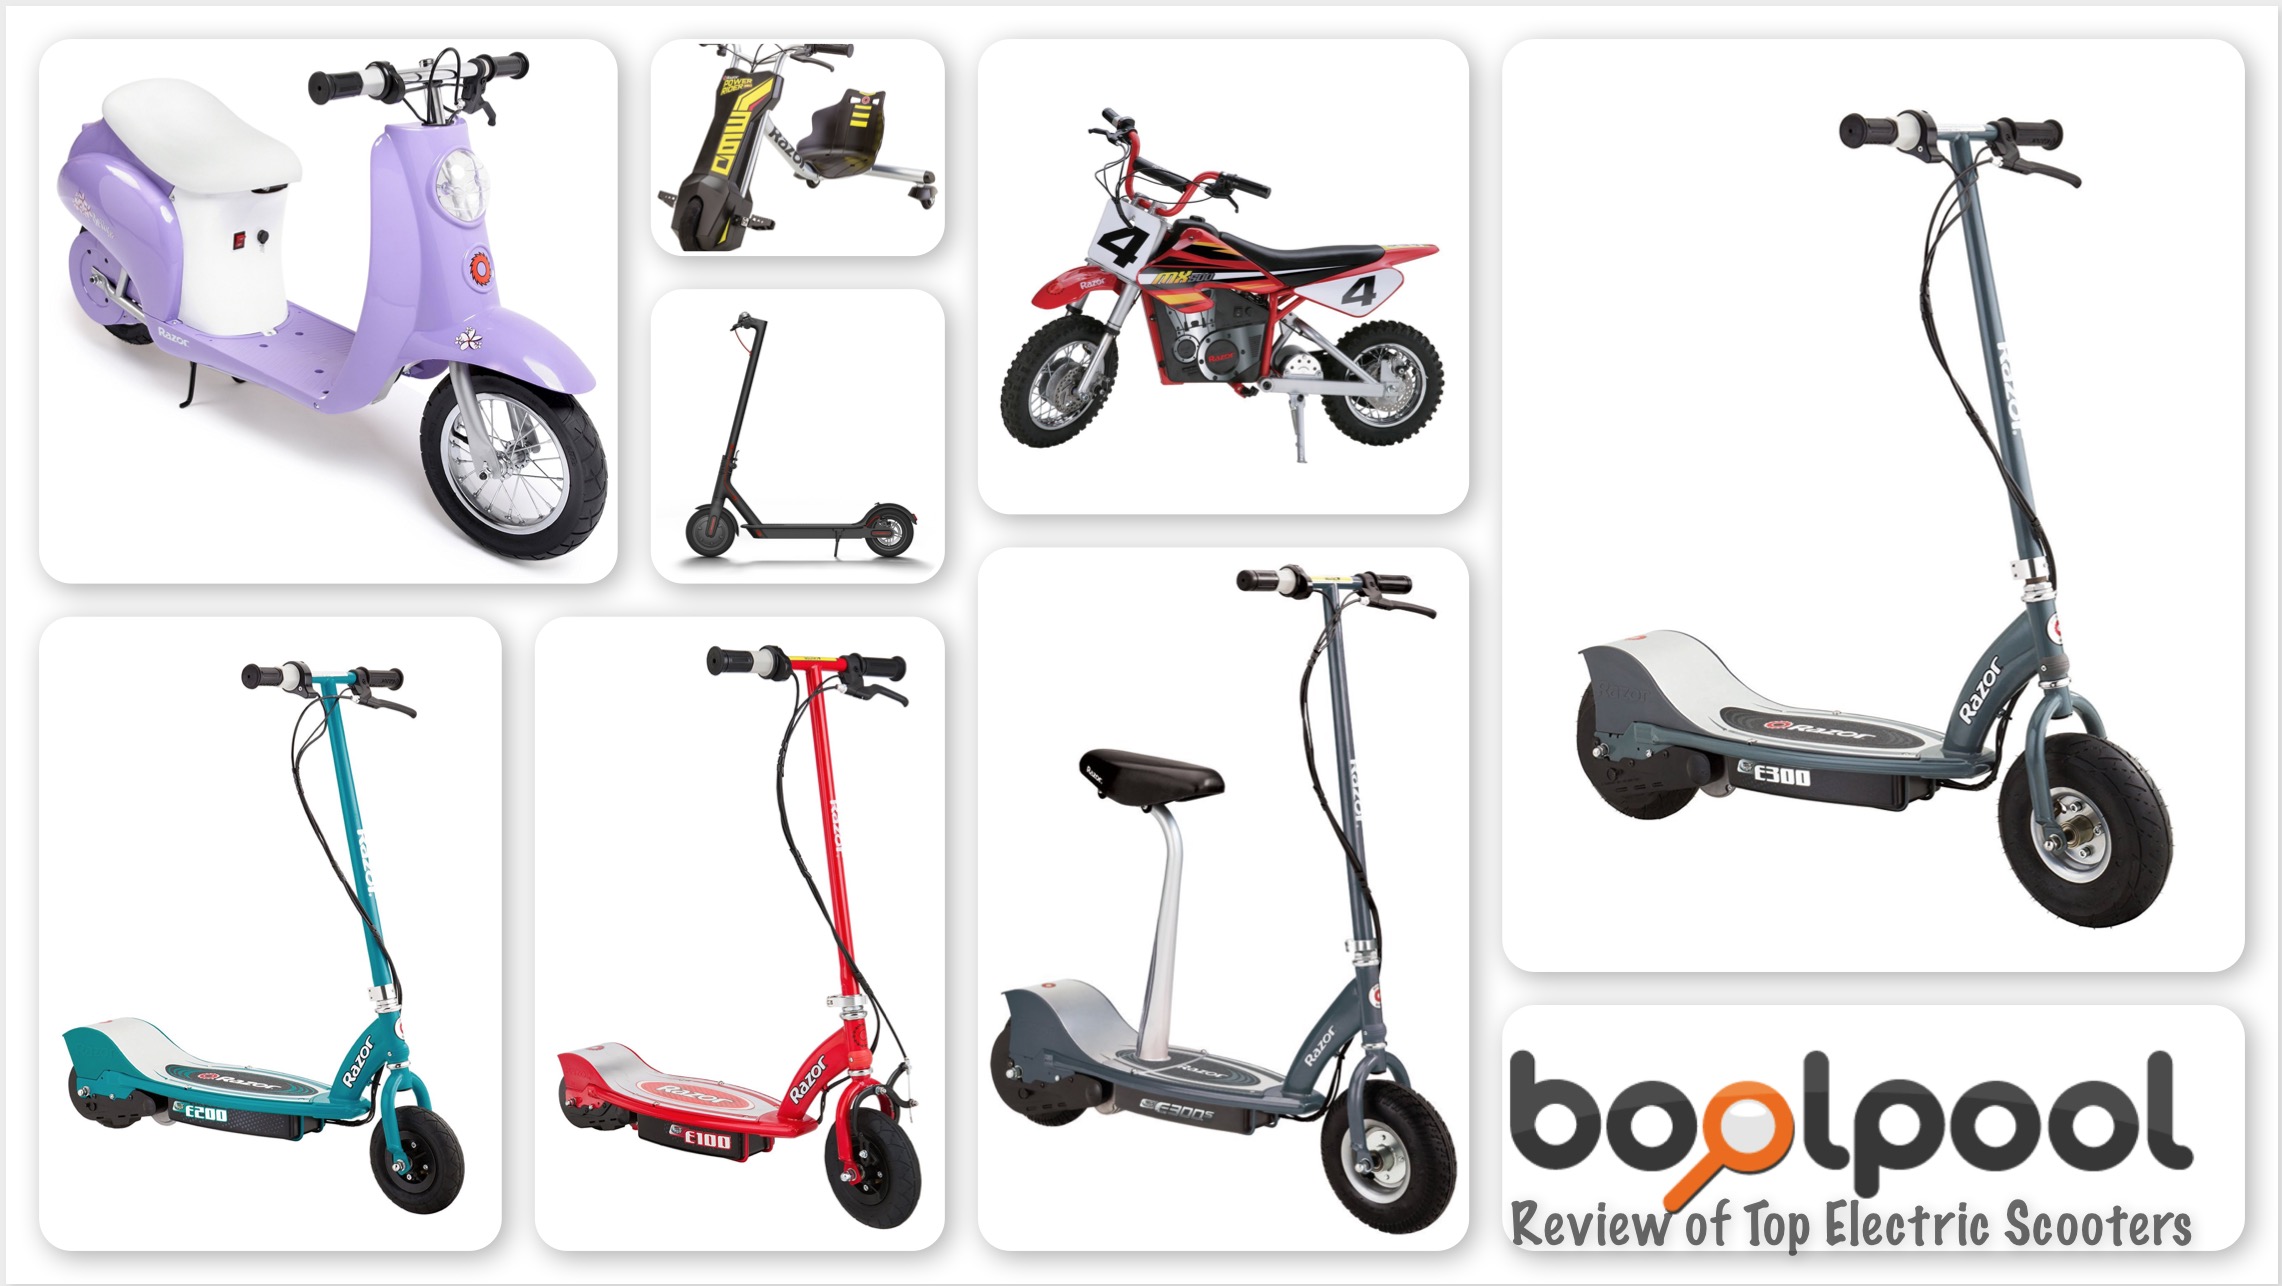 Top 8 Electric Scooters